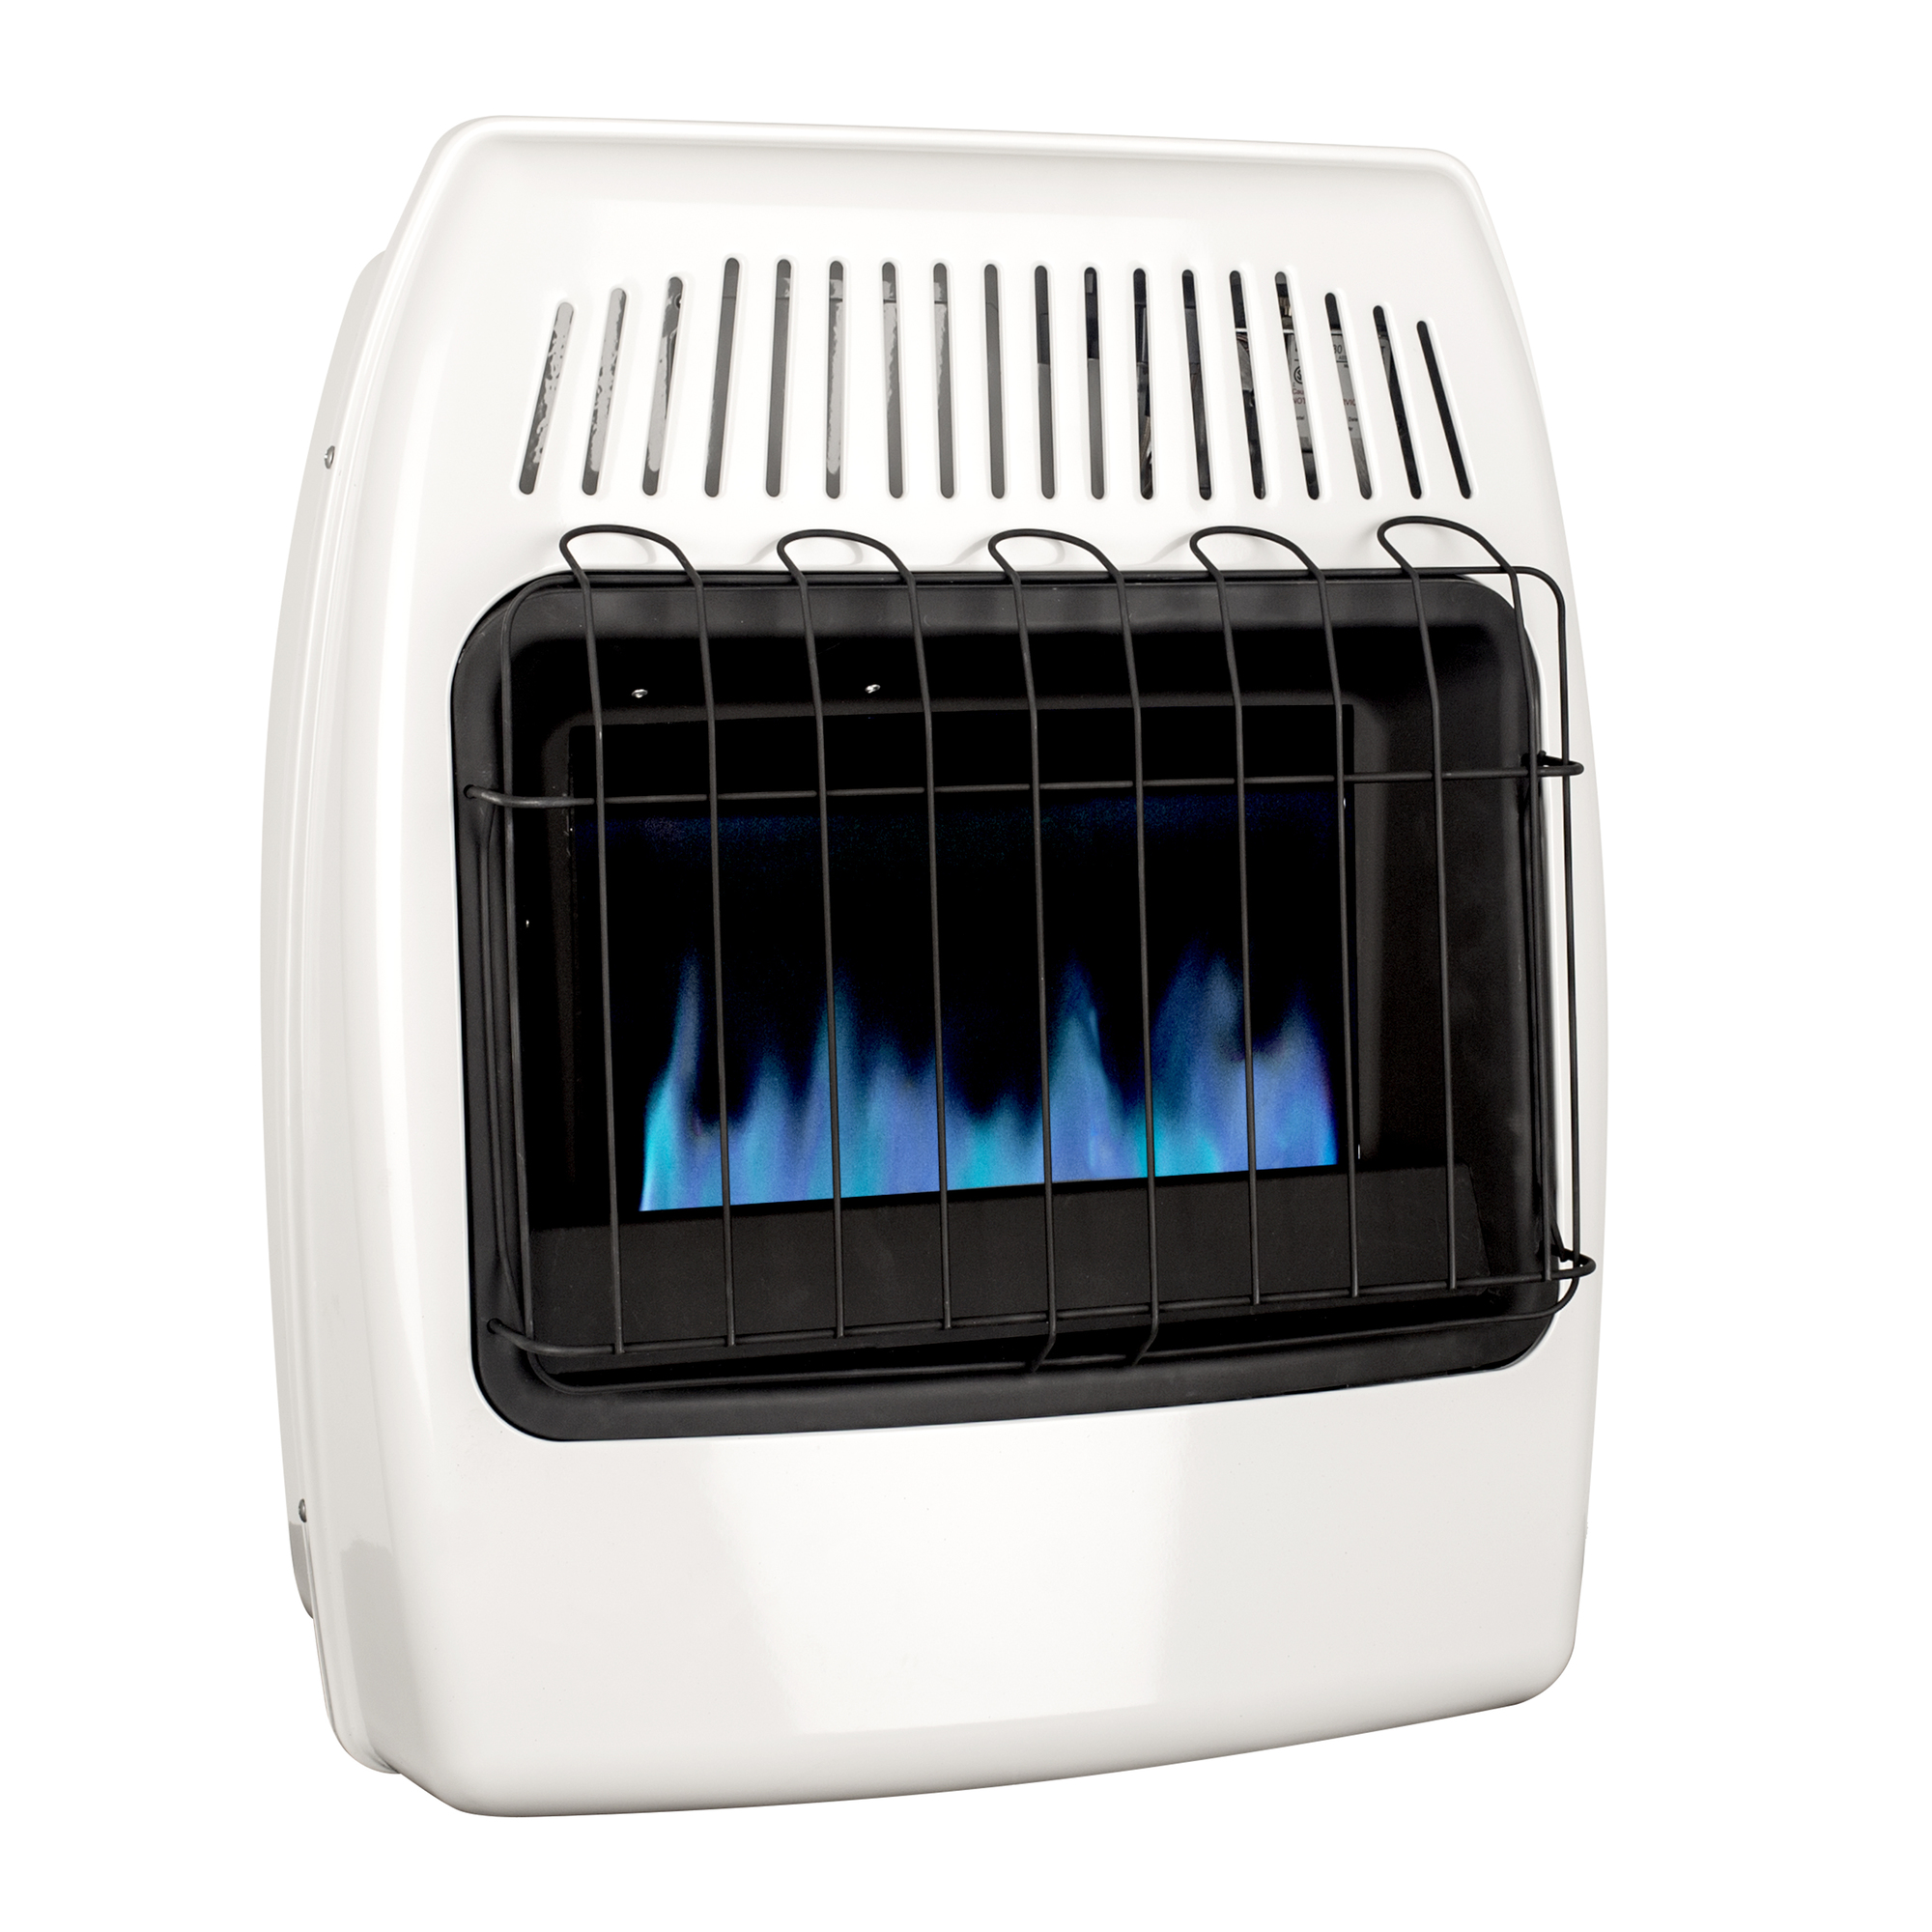 20K BTU NG Blue Flame Vent Free Wall Heater, Heat Output 20000 Btu/hour, Heating Capability 700 ft², Fuel Type Natural Gas, Model - Dyna Glo BF20NMDG-4